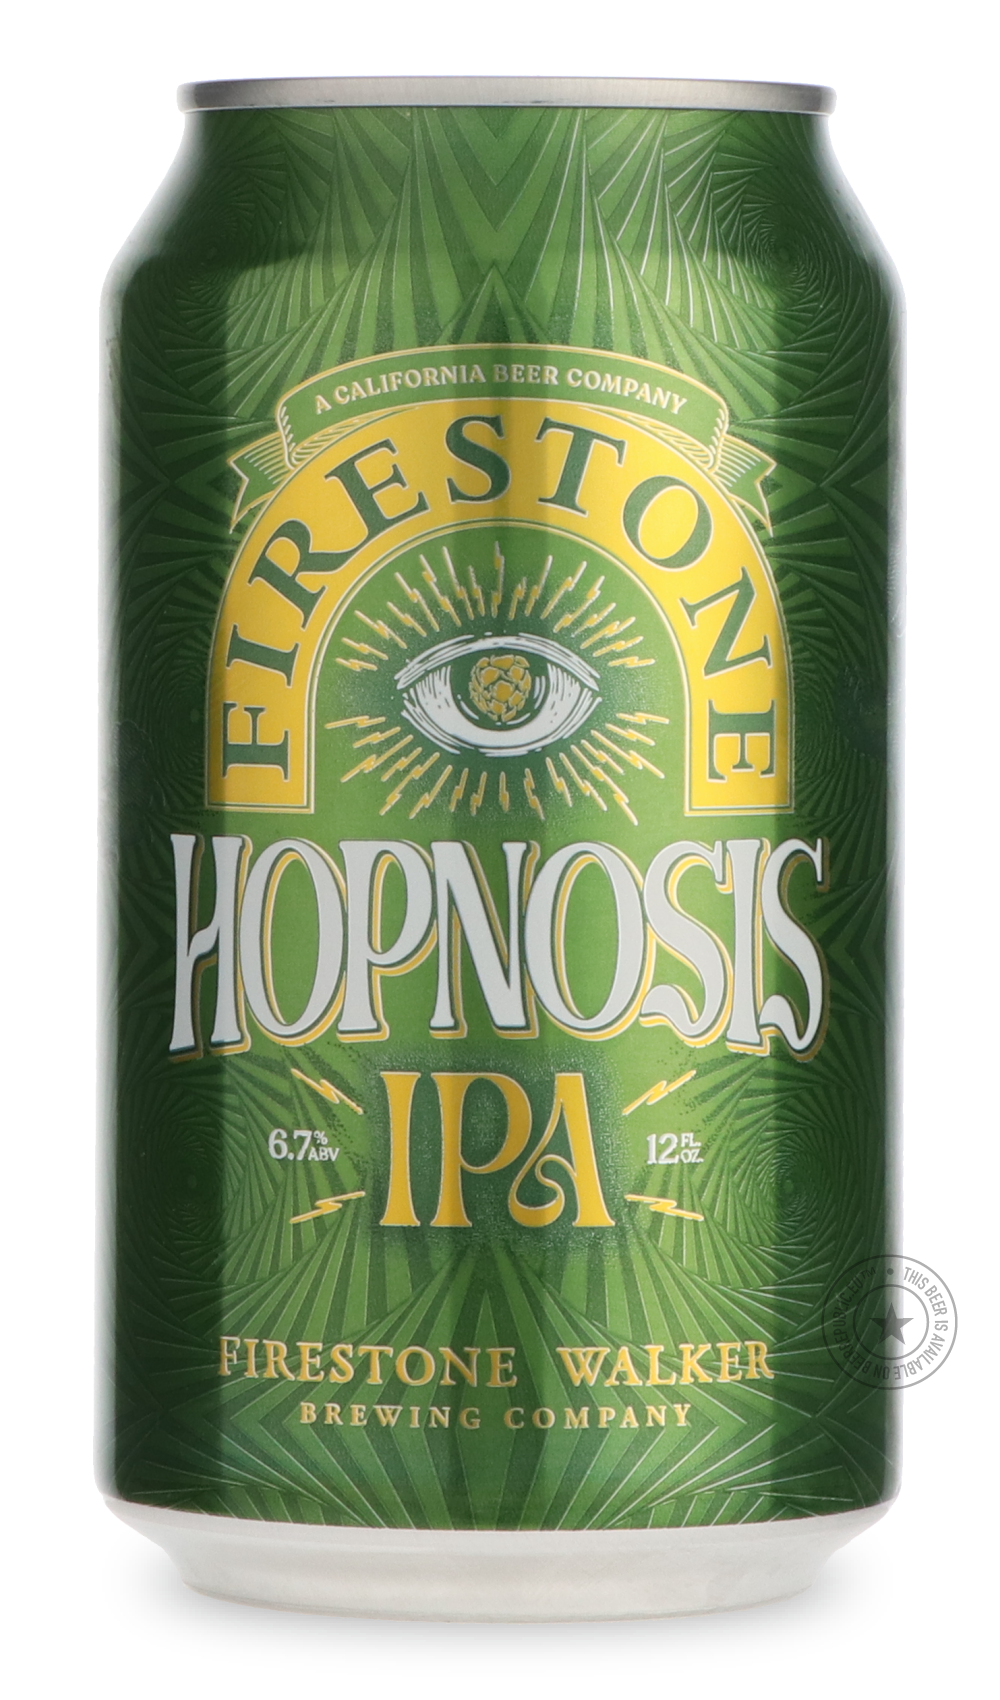 -Firestone Walker- Hopnosis-IPA- Only @ Beer Republic - The best online beer store for American & Canadian craft beer - Buy beer online from the USA and Canada - Bier online kopen - Amerikaans bier kopen - Craft beer store - Craft beer kopen - Amerikanisch bier kaufen - Bier online kaufen - Acheter biere online - IPA - Stout - Porter - New England IPA - Hazy IPA - Imperial Stout - Barrel Aged - Barrel Aged Imperial Stout - Brown - Dark beer - Blond - Blonde - Pilsner - Lager - Wheat - Weizen - Amber - Barle